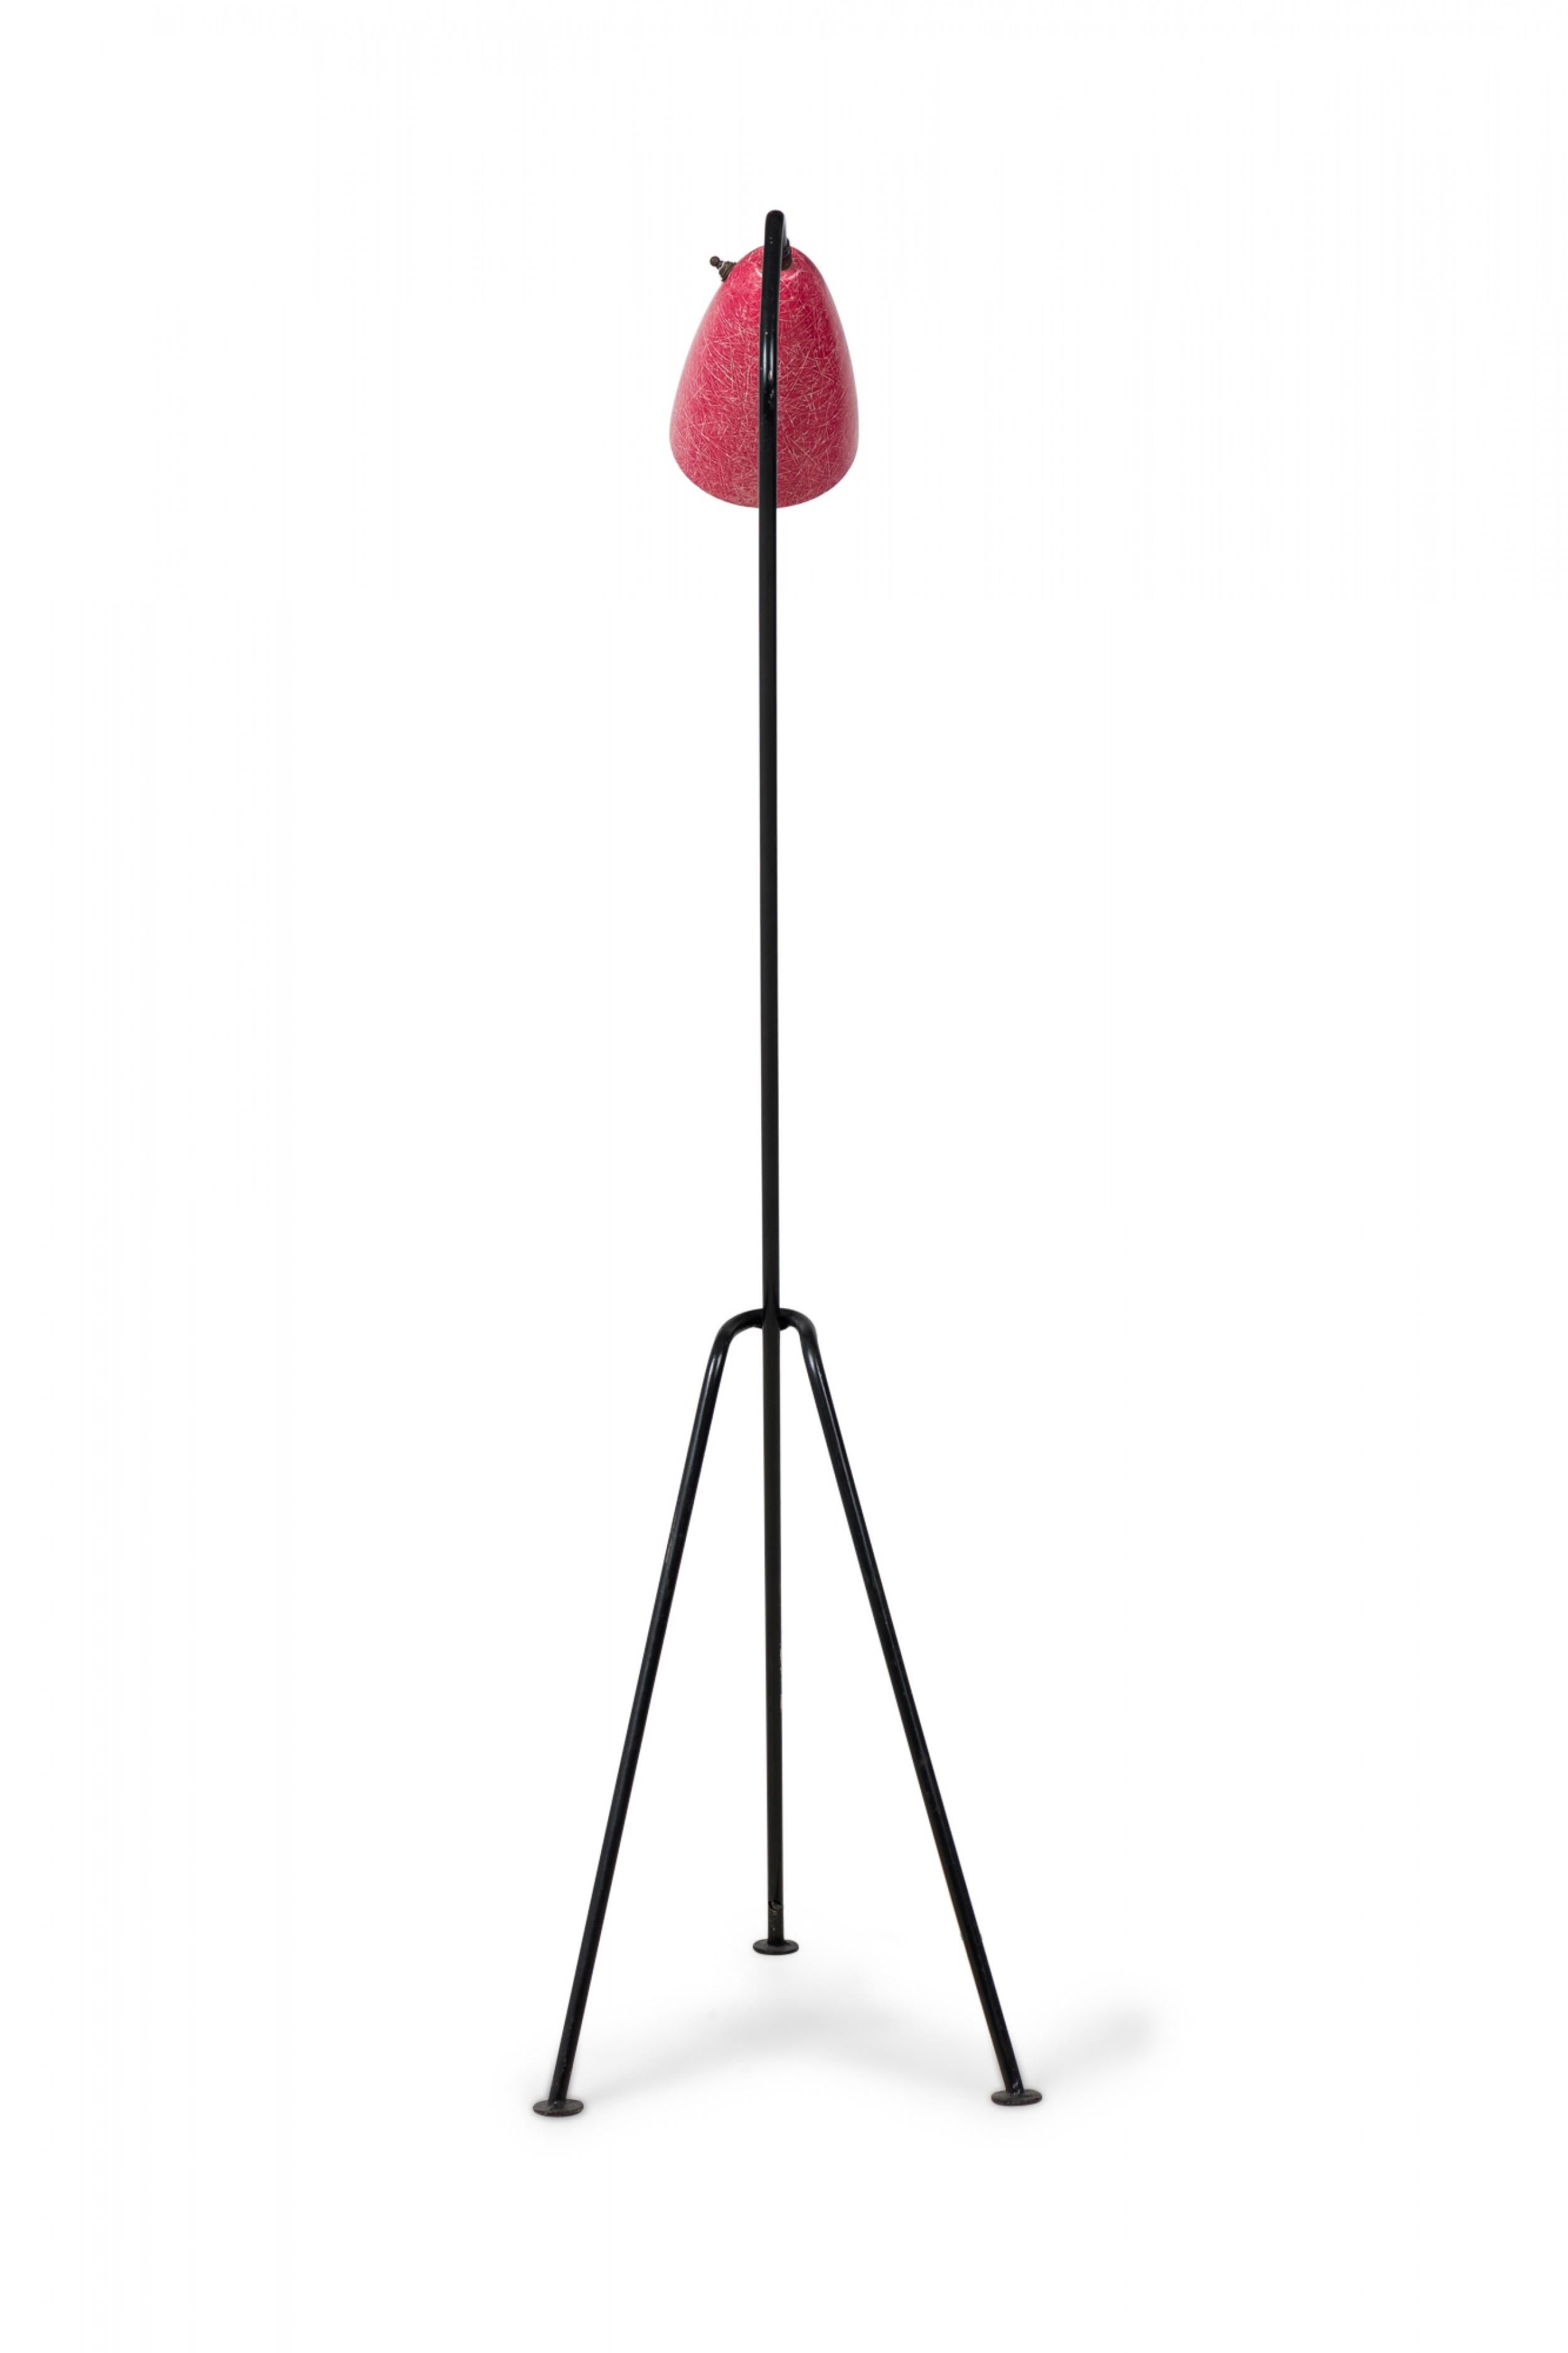 Greta Grossman Midcentury American Grasshopper Red Floor Lamp In Good Condition For Sale In New York, NY